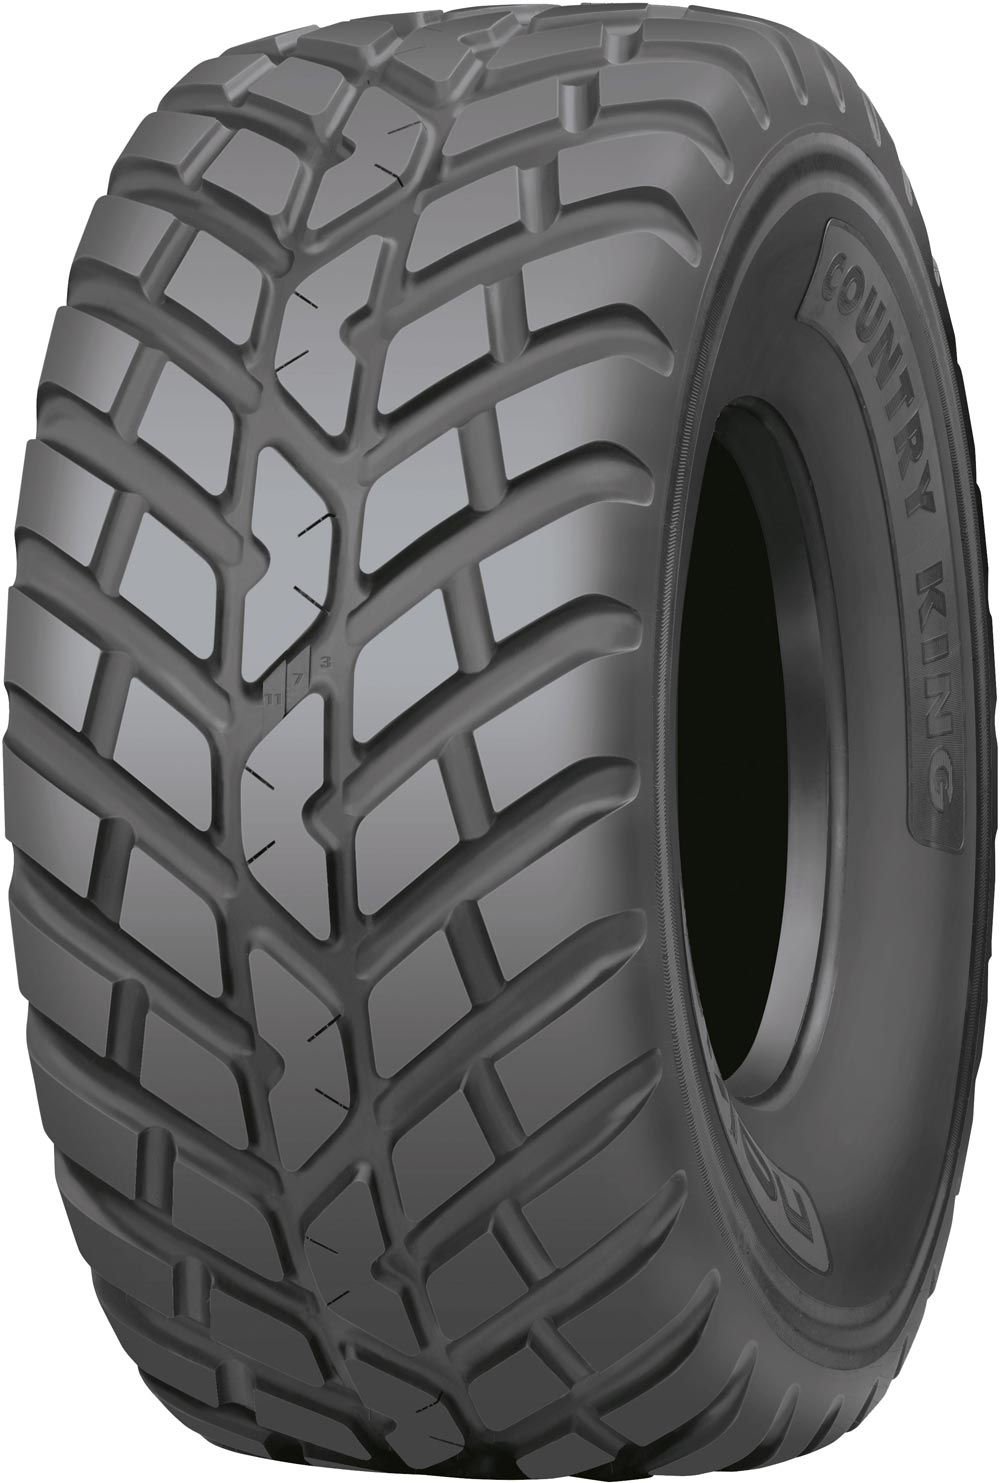 Индустриални гуми NOKIAN COUNTRY KING TL 560/60 R22.5 161D